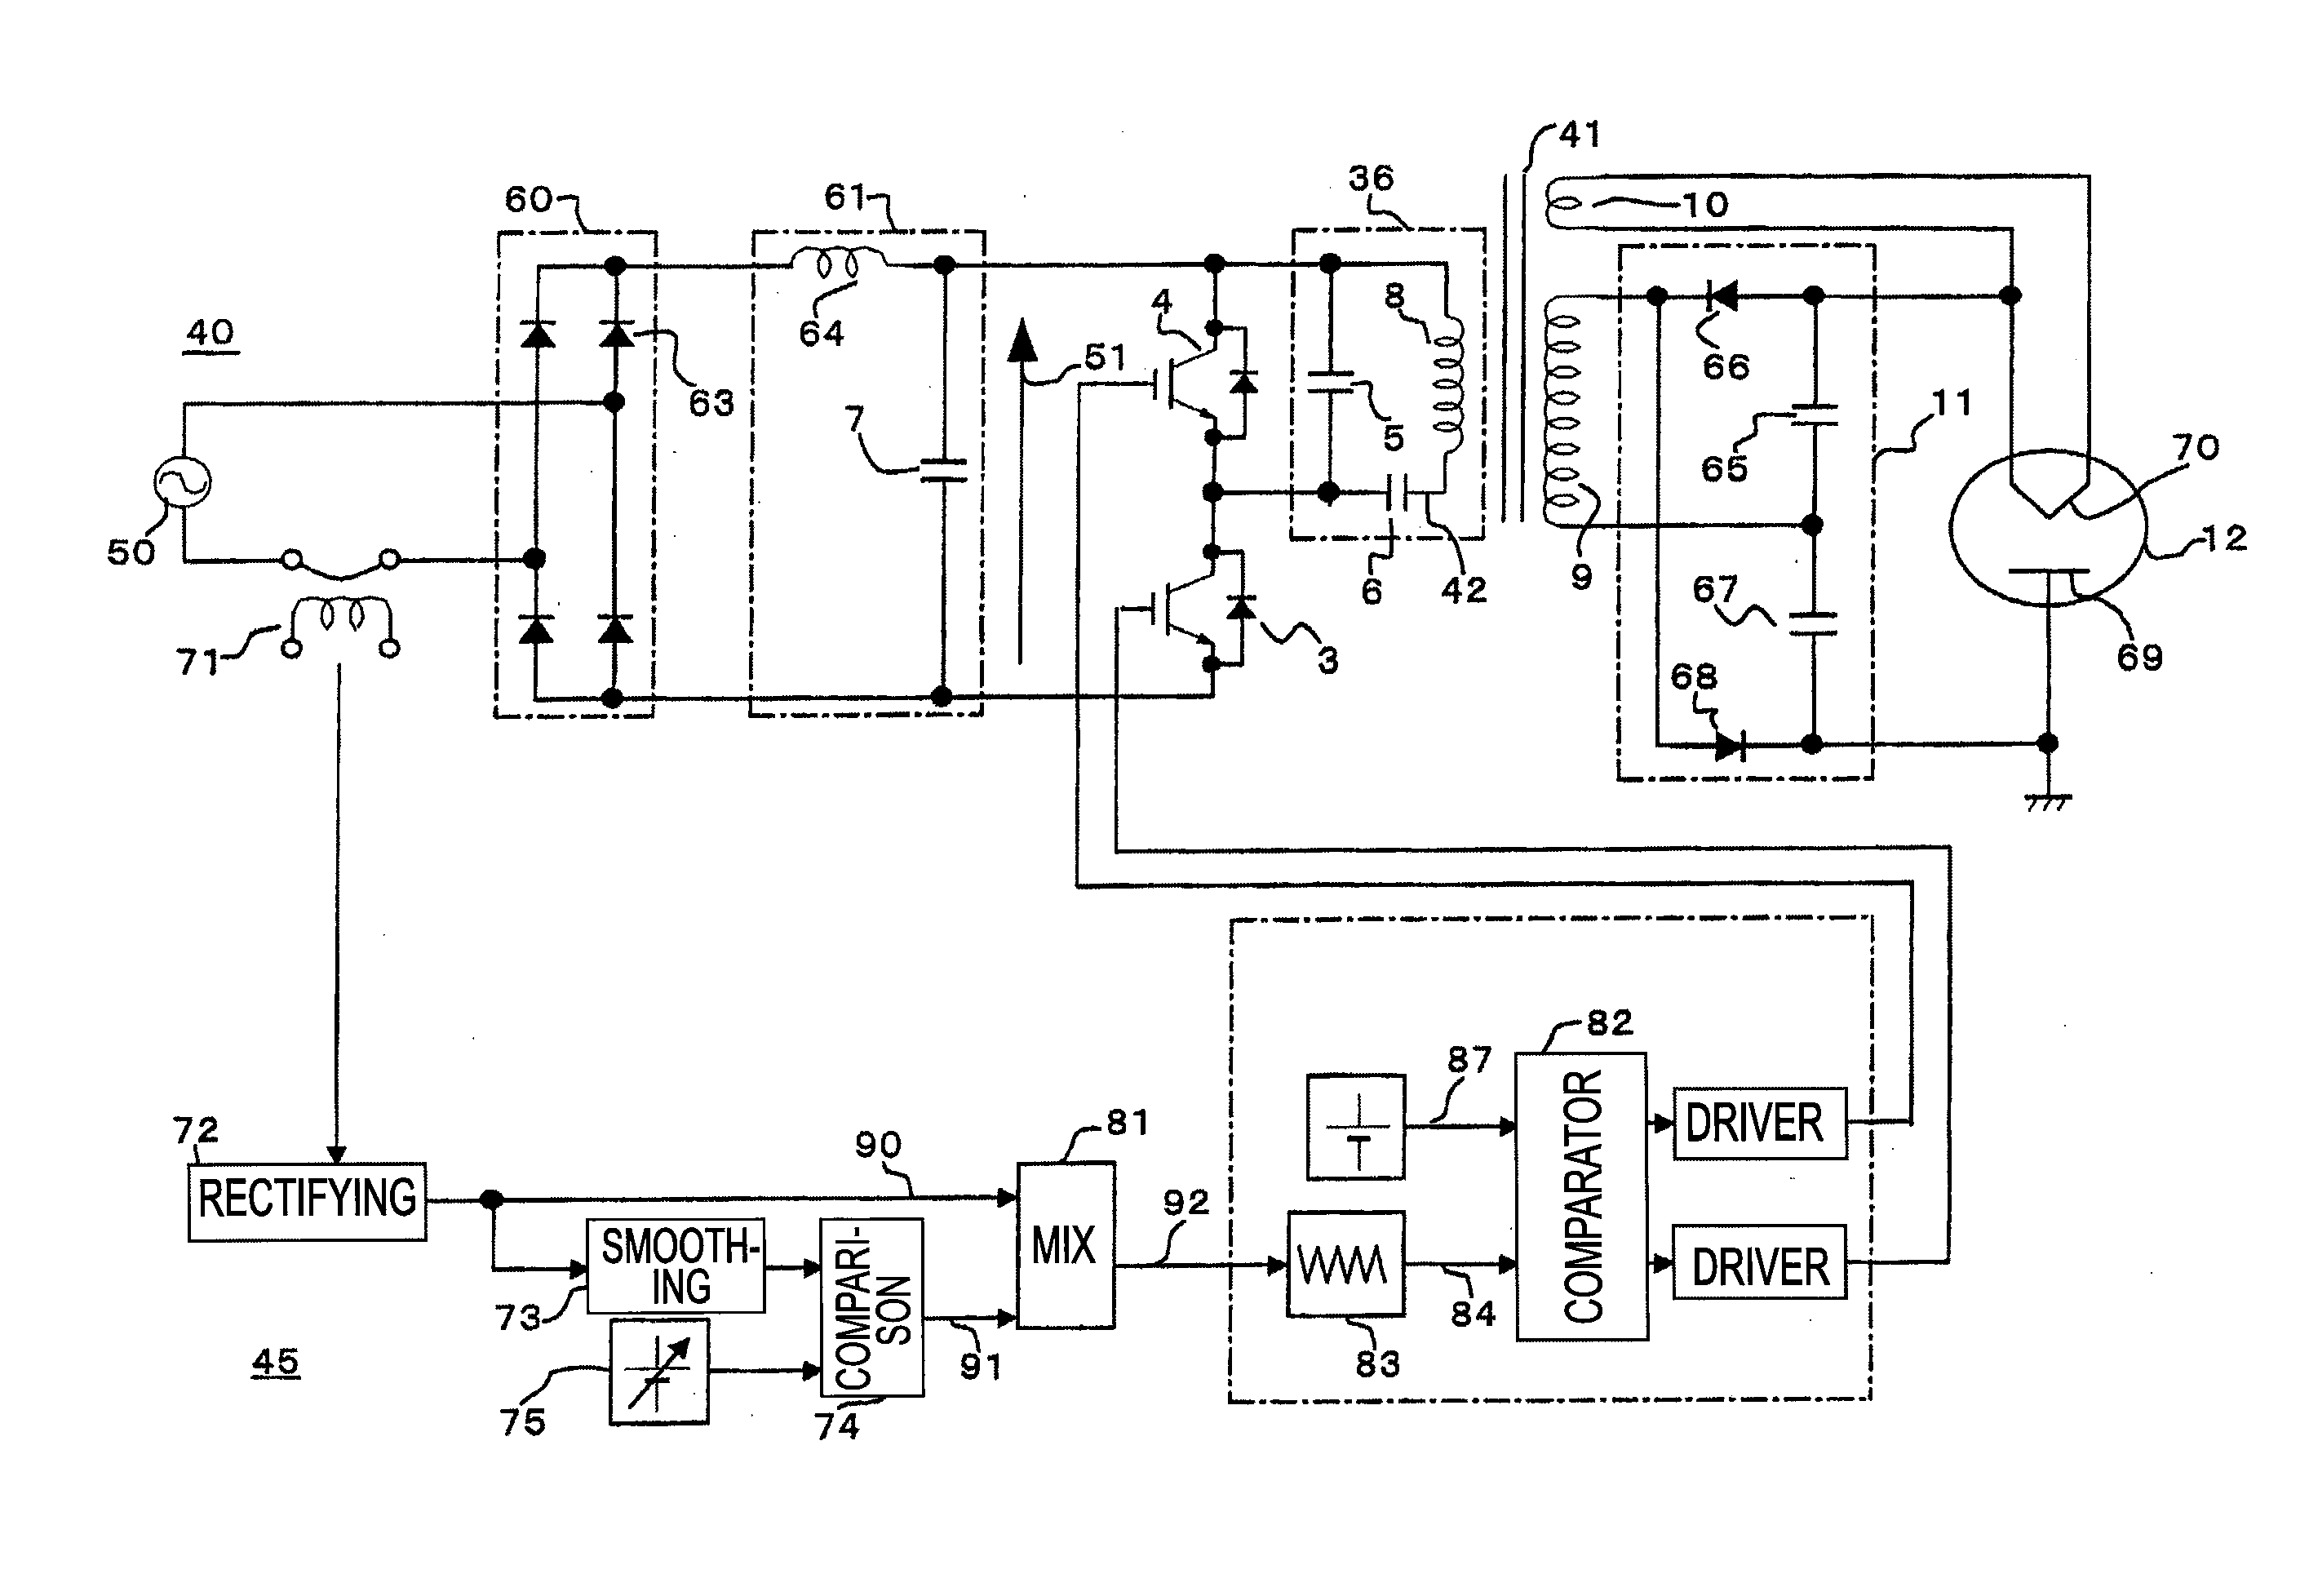 Power control unit for high-frequency dielectric heating and control method thereof